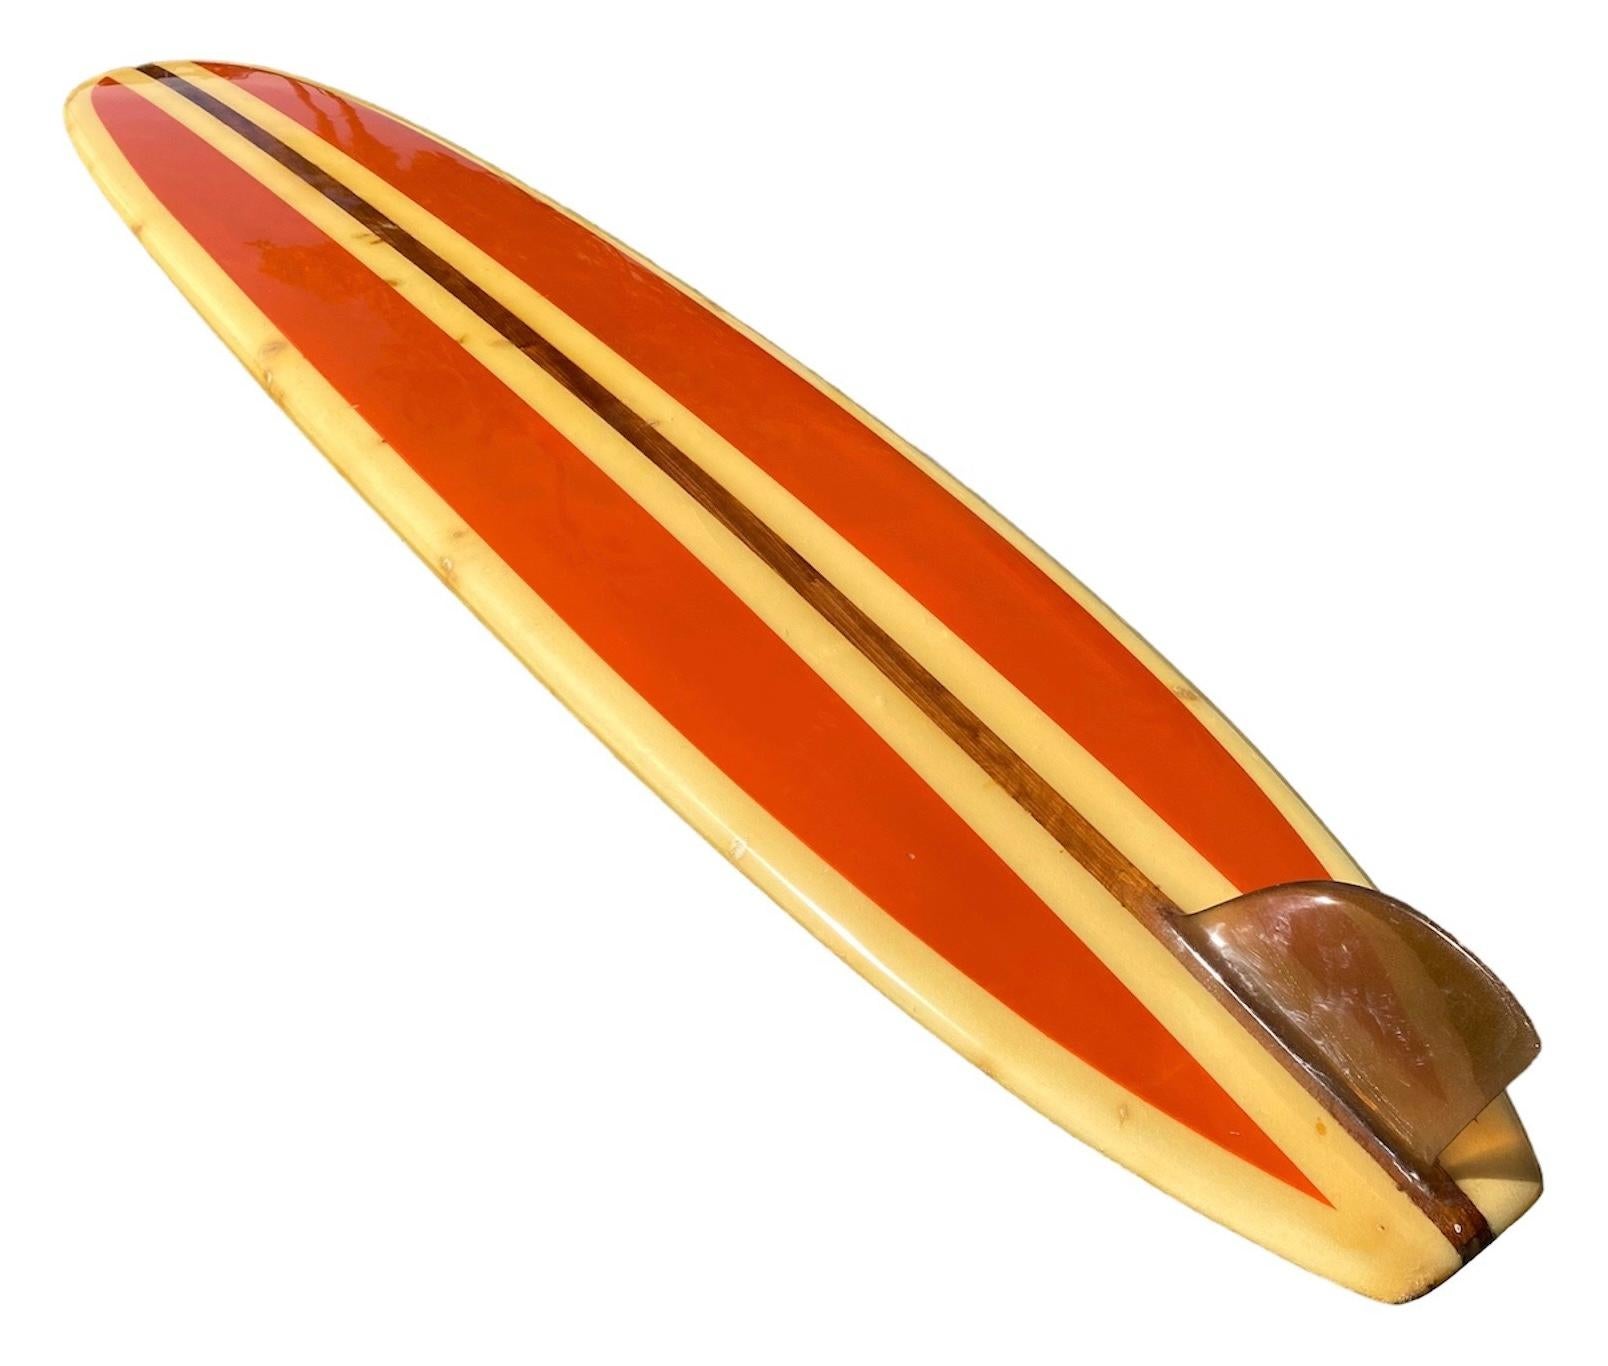 Early-1960s Vintage Ten Toes classic longboard. Features gorgeous orange pigment panels with redwood stringer and glassed-on fin. A remarkable example of a classic early 60s longboard in all original condition.